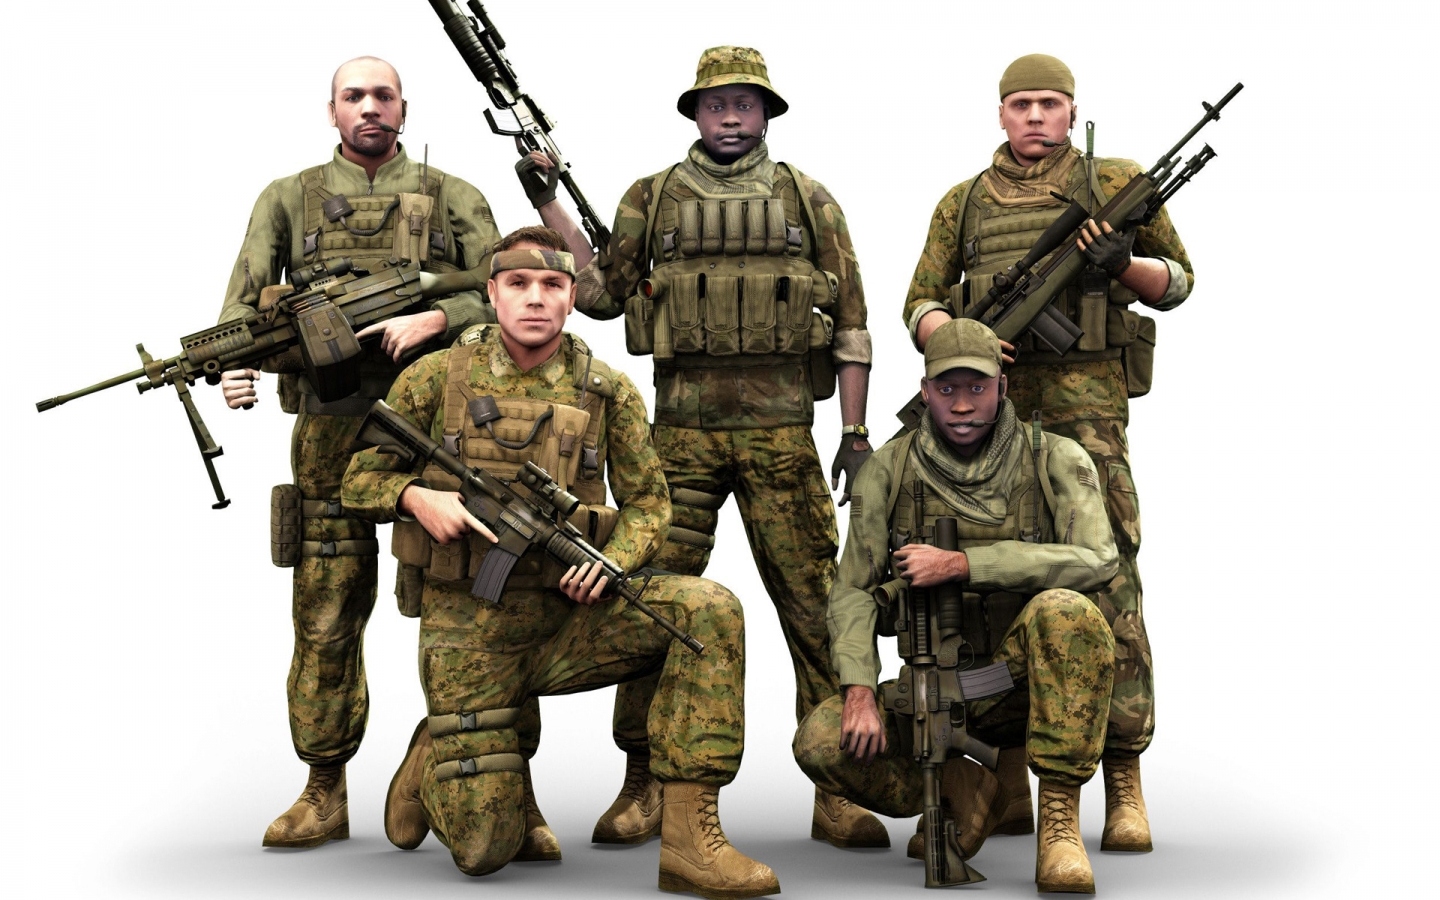 ArmA 2 Characters for 1440 x 900 widescreen resolution